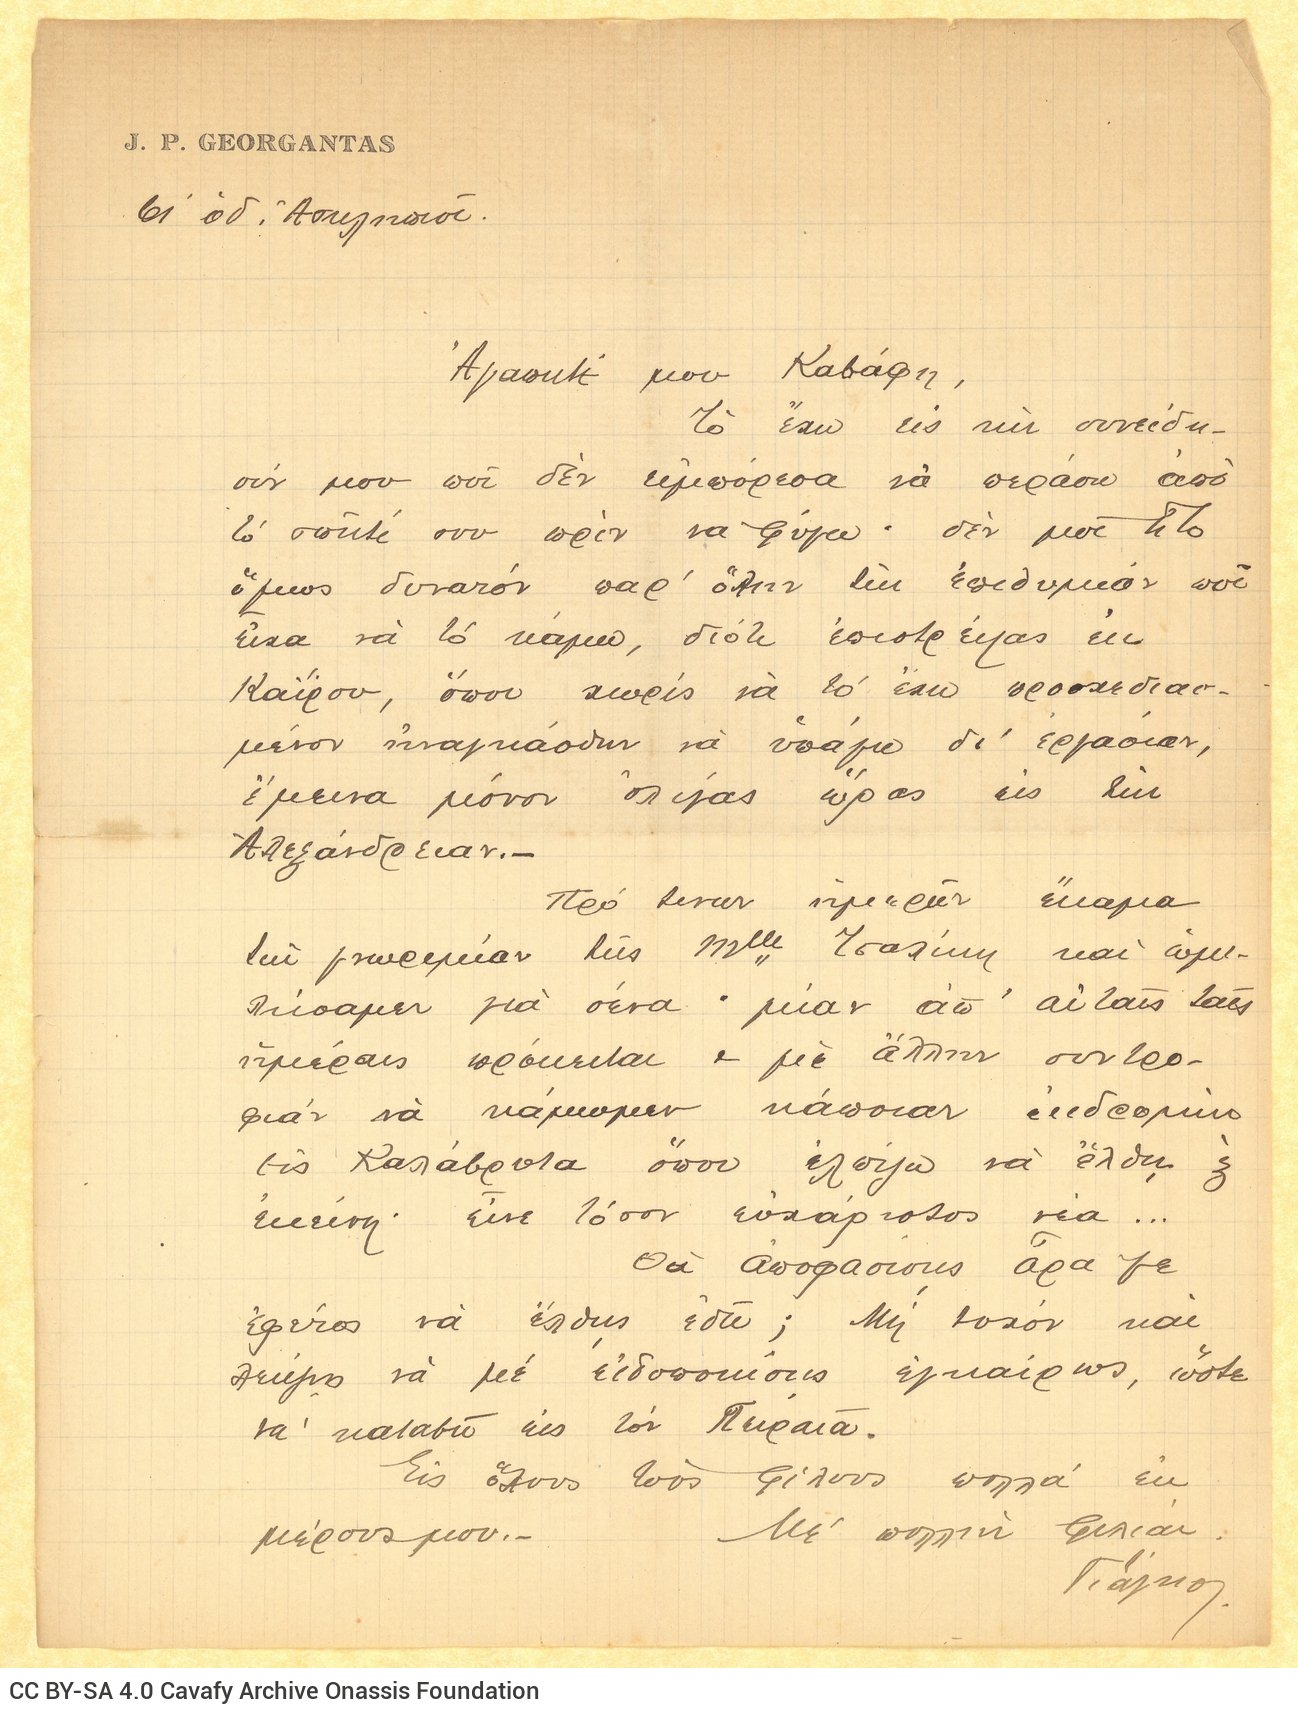 Handwritten letter by Giagkos Georgantas to Cavafy. The author refers to a trip of his to Egypt, urges Cavafy to visit Greece